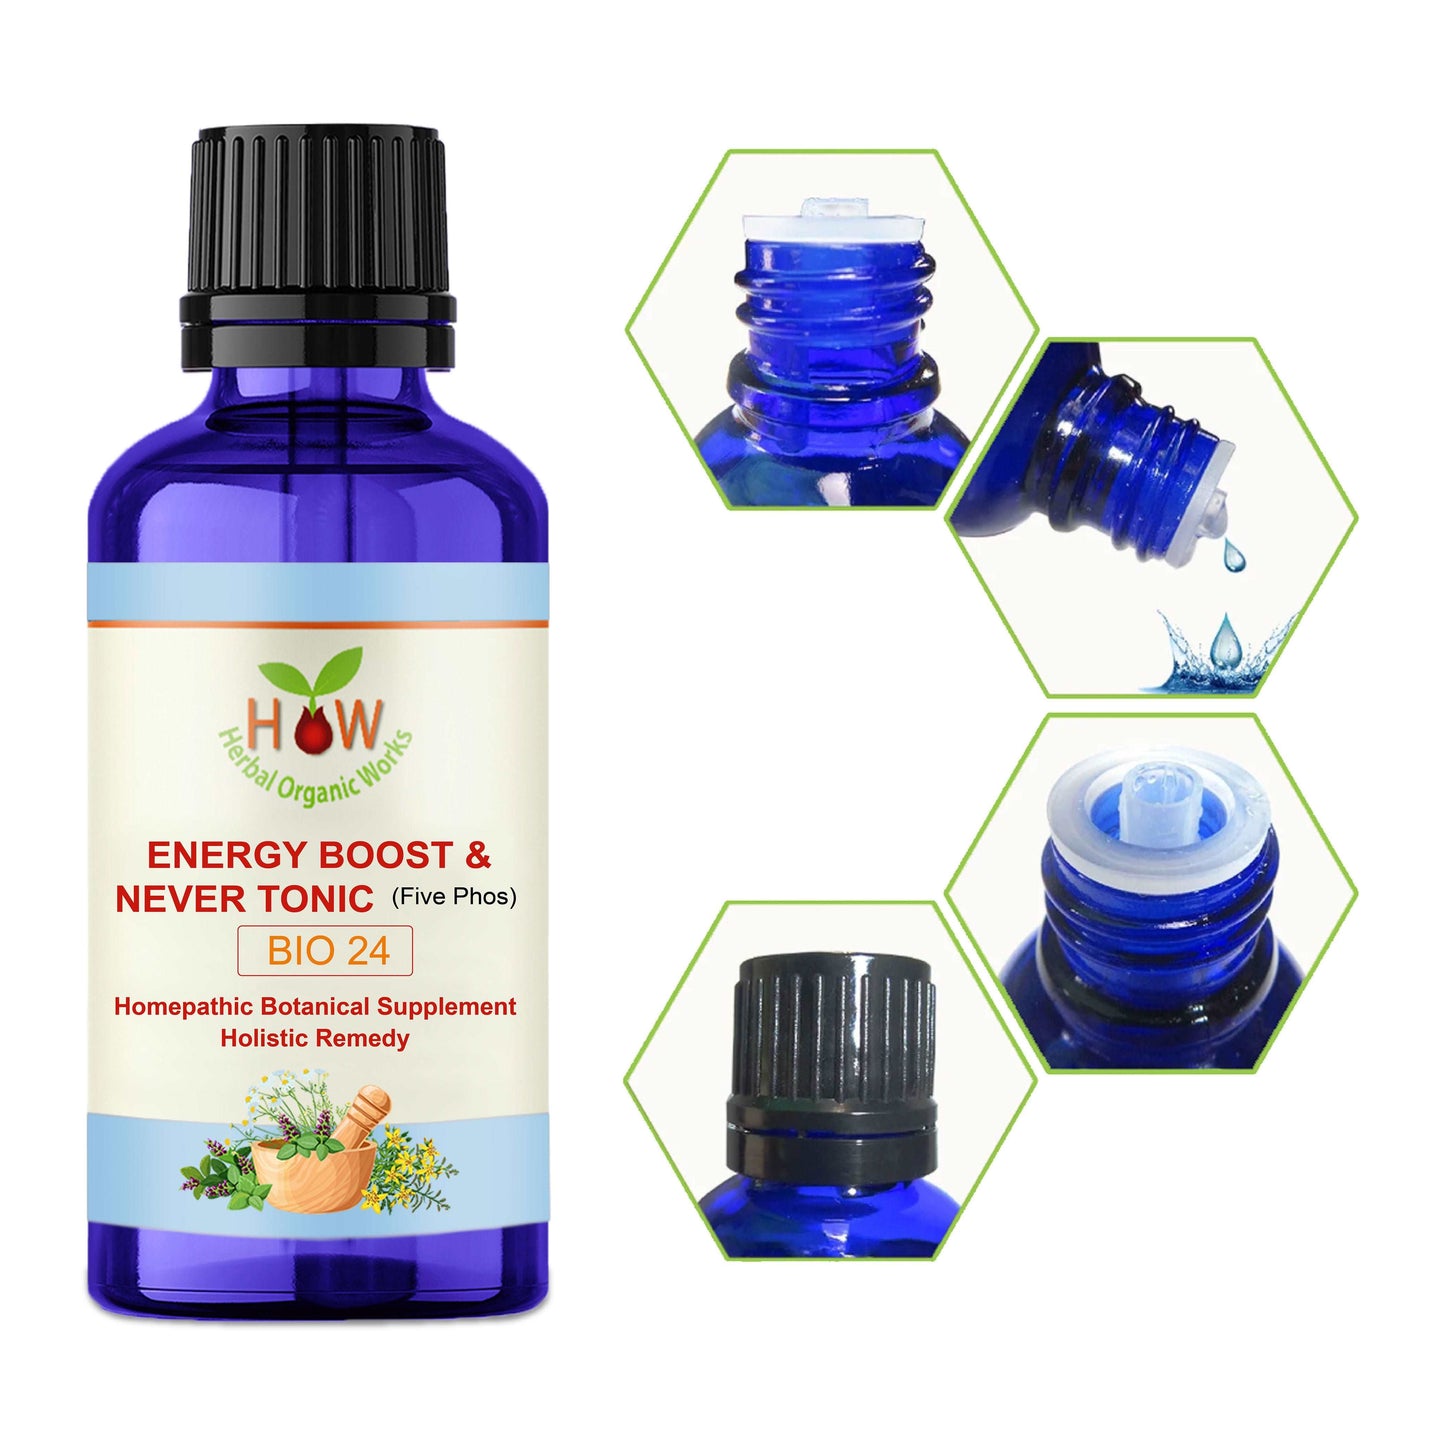 ENERGY BOOST AND NEVER TONIC REMEDY (BIO24)